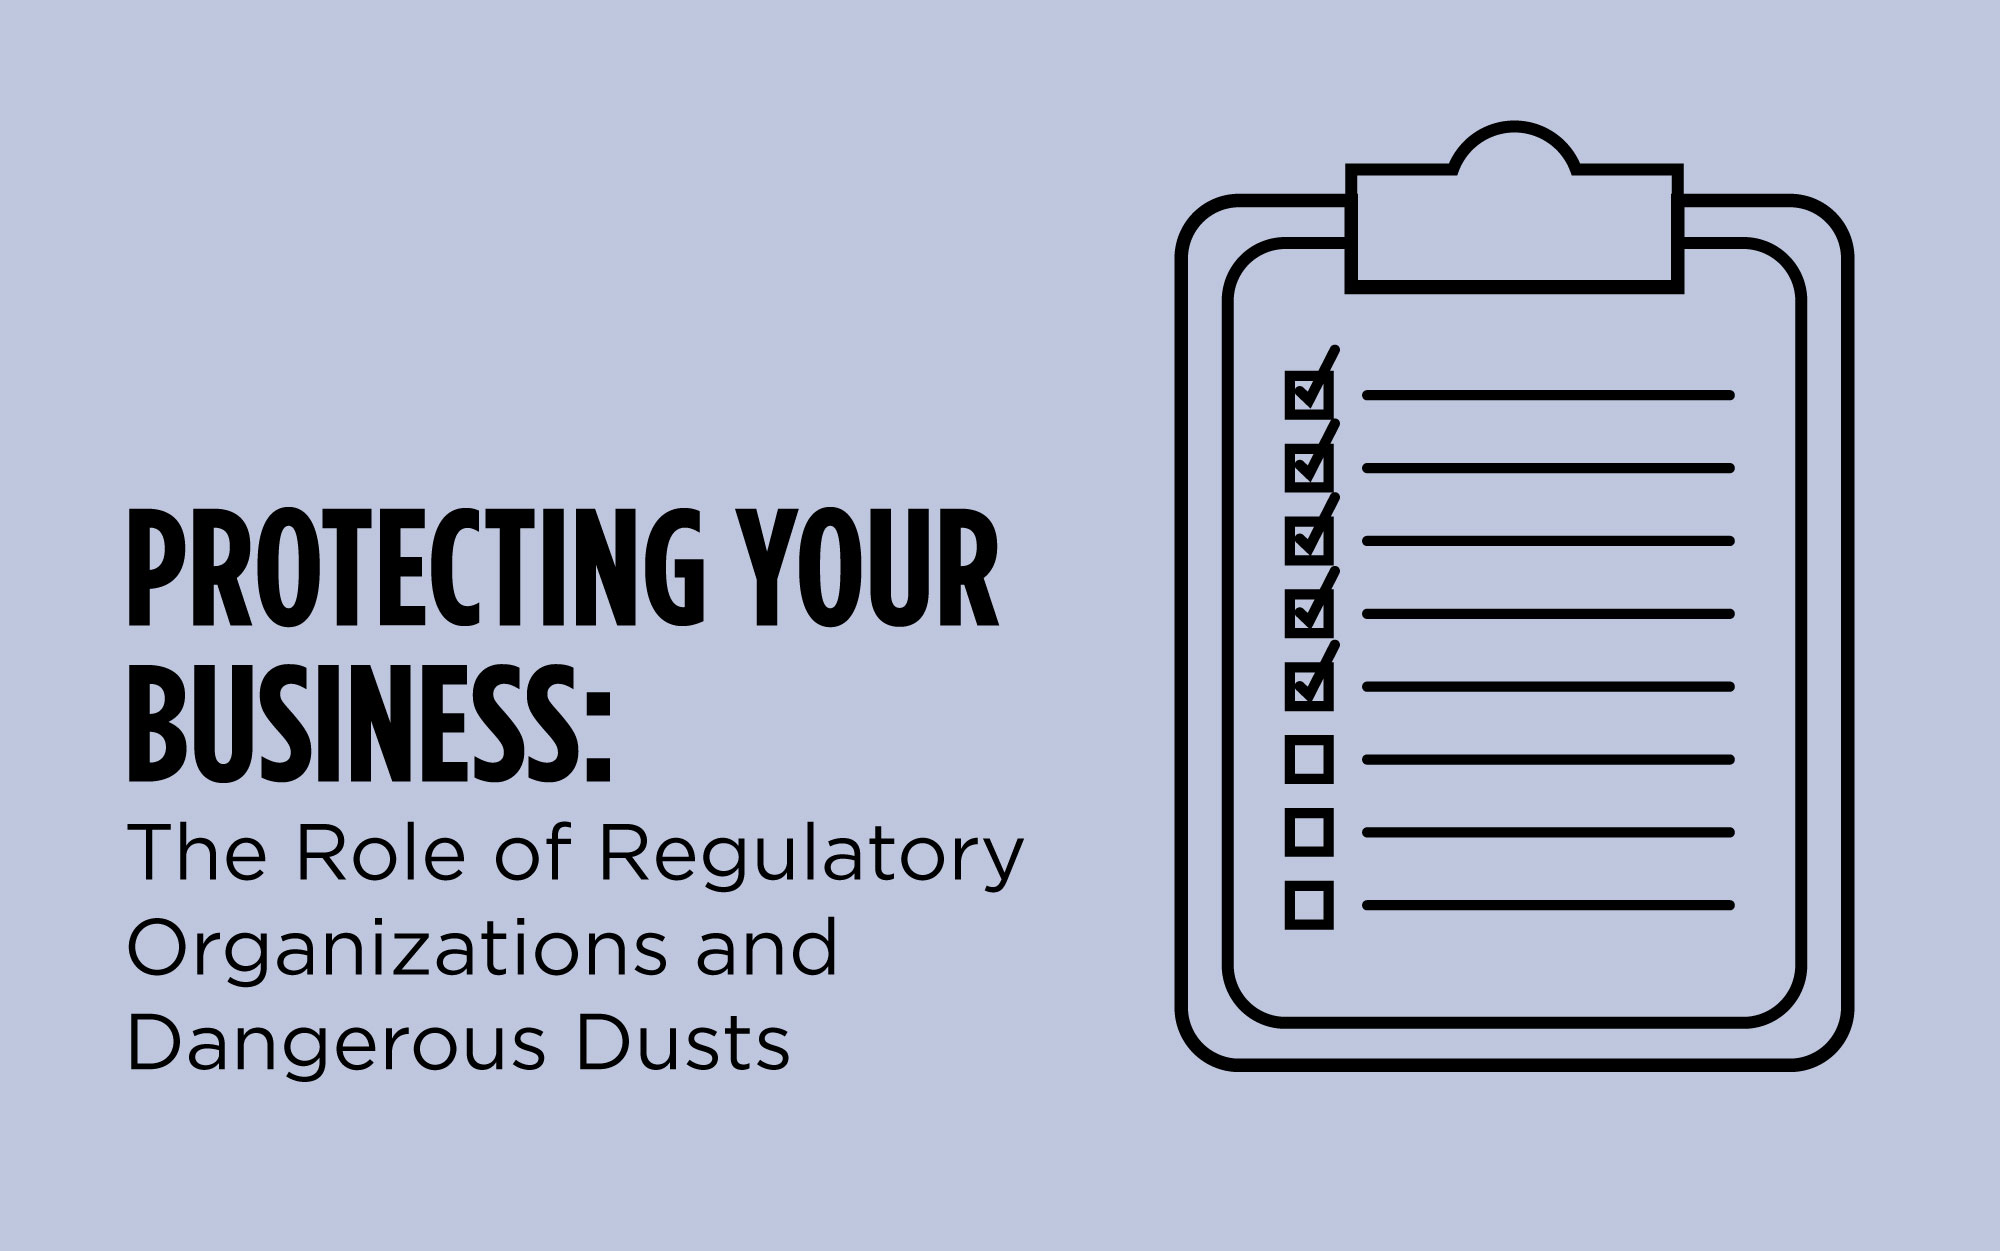 Clipboard checklist graphic with text Protecting Your Business: The Role of Regulatory Organizations and Dangerous Dusts